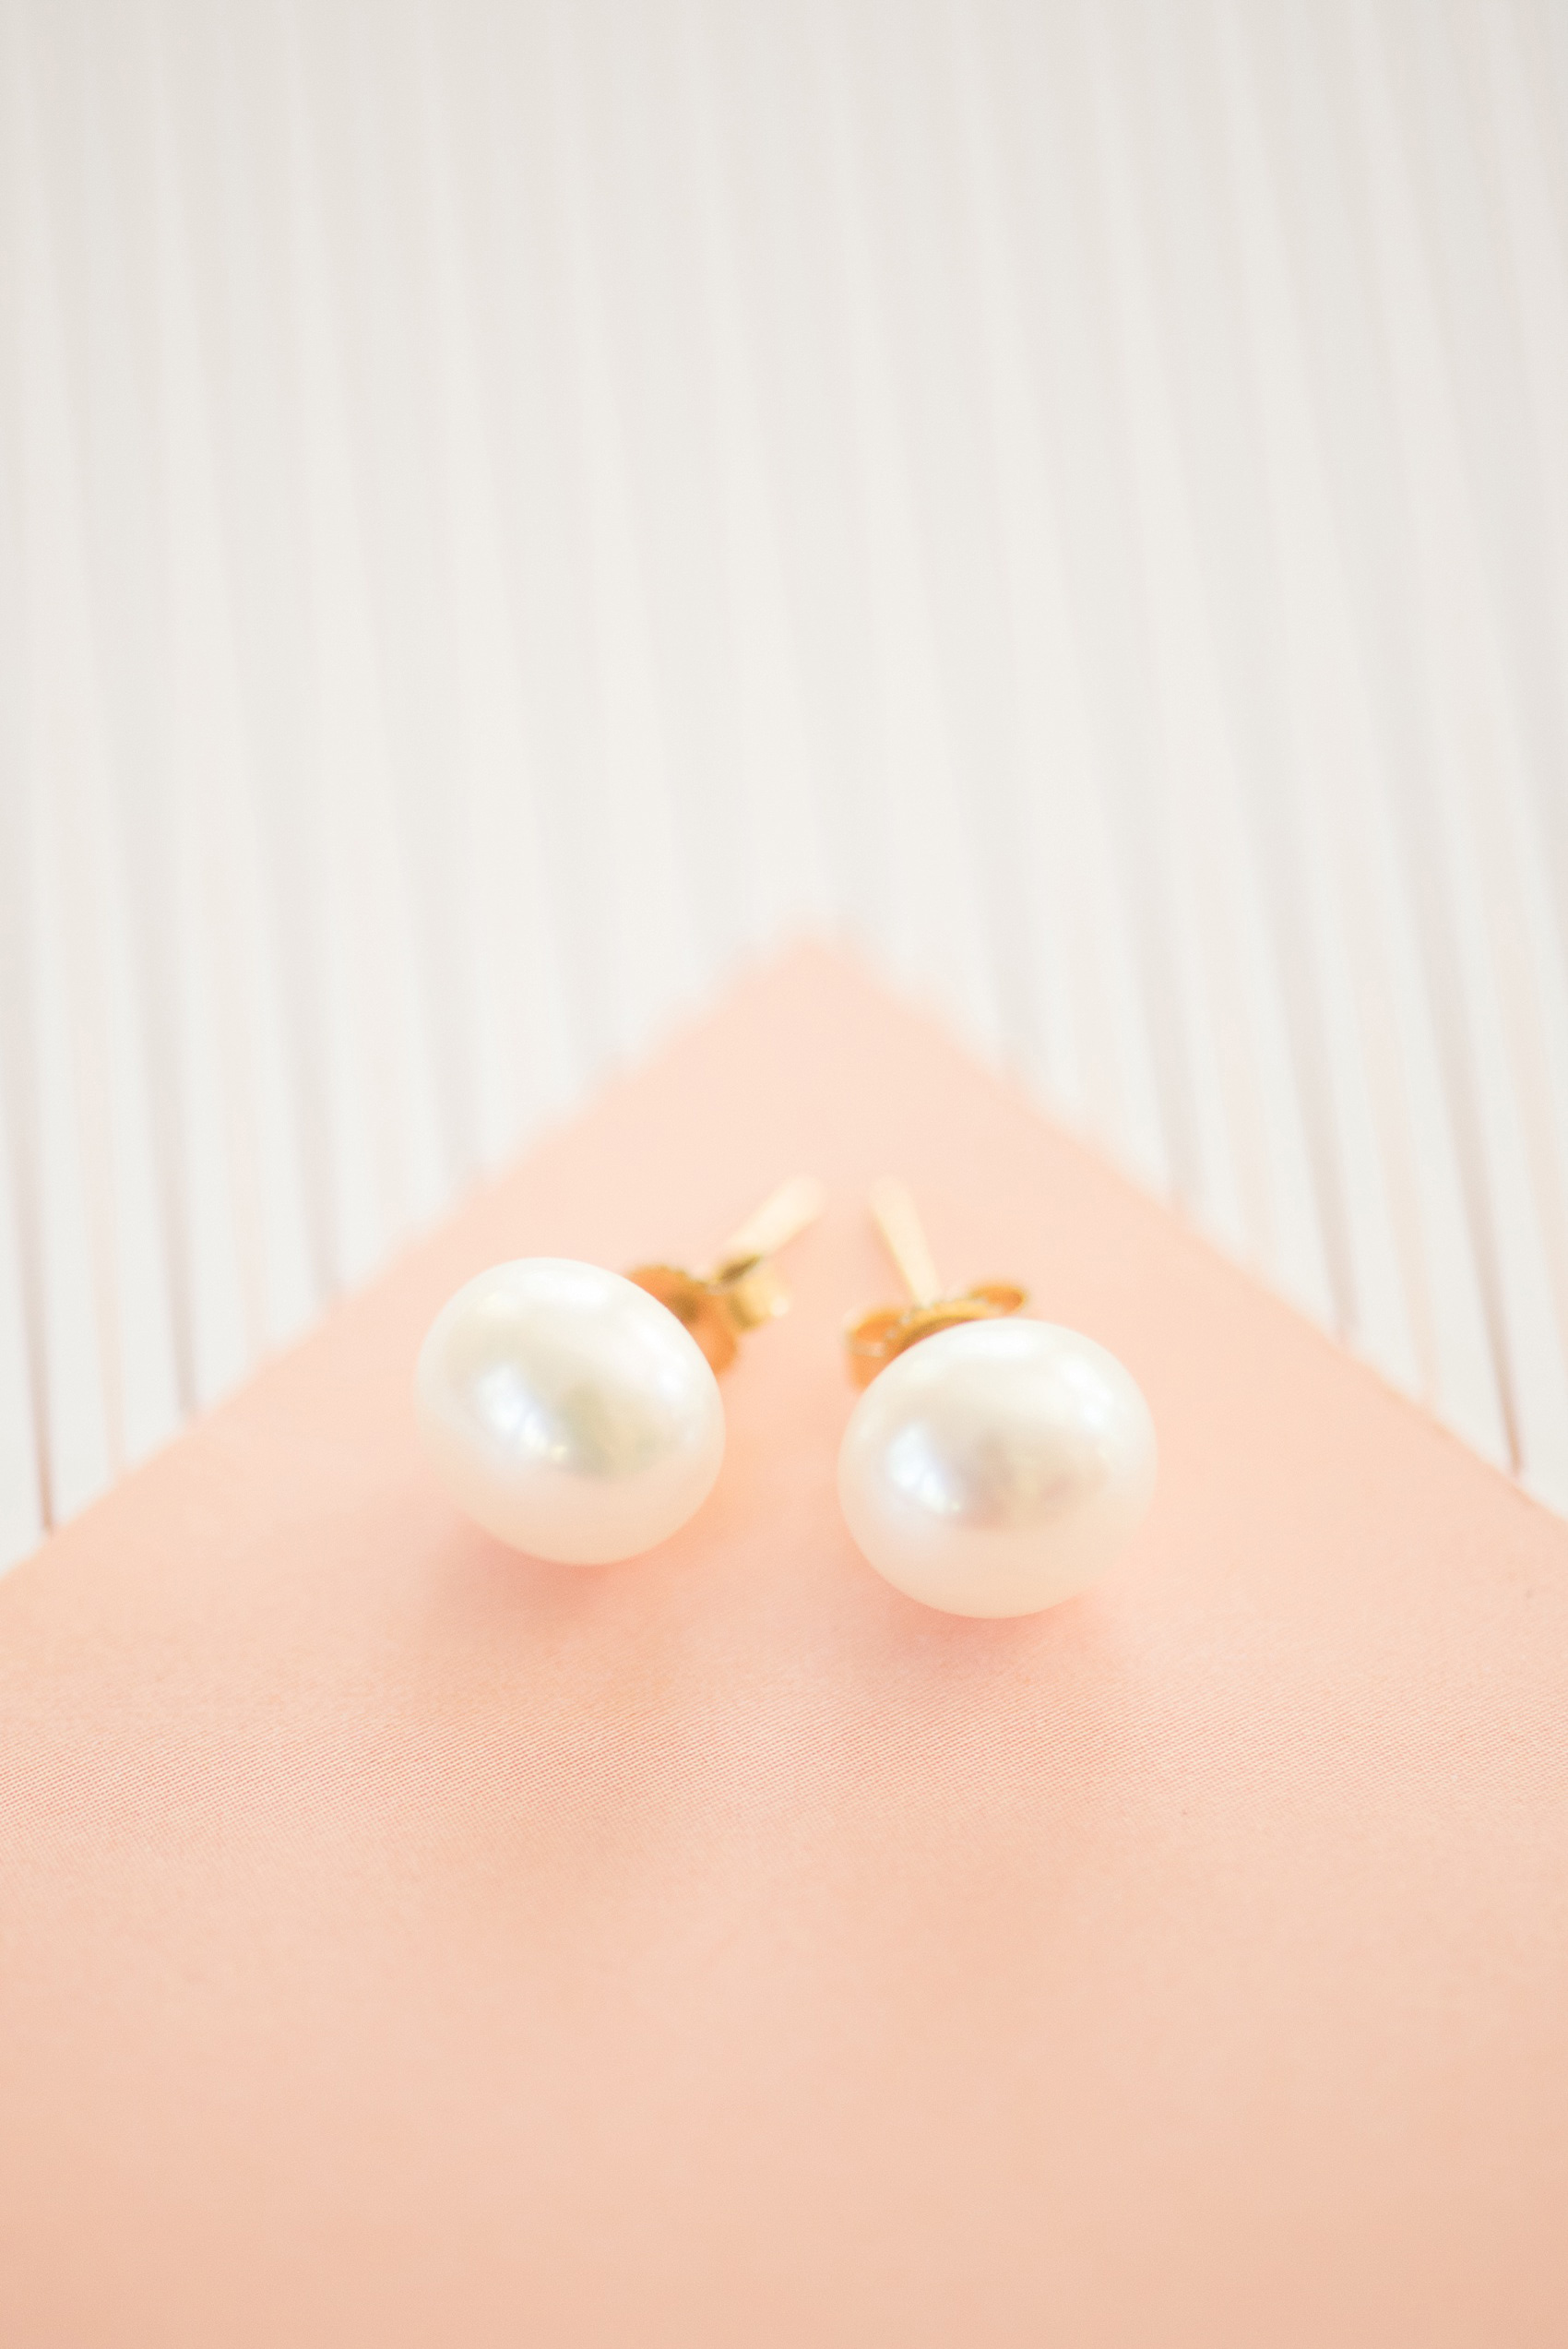 Mikkel Paige Photography photo of a wedding at The Rickhouse, Durham. A detail image of the bride's pearl earring studs.